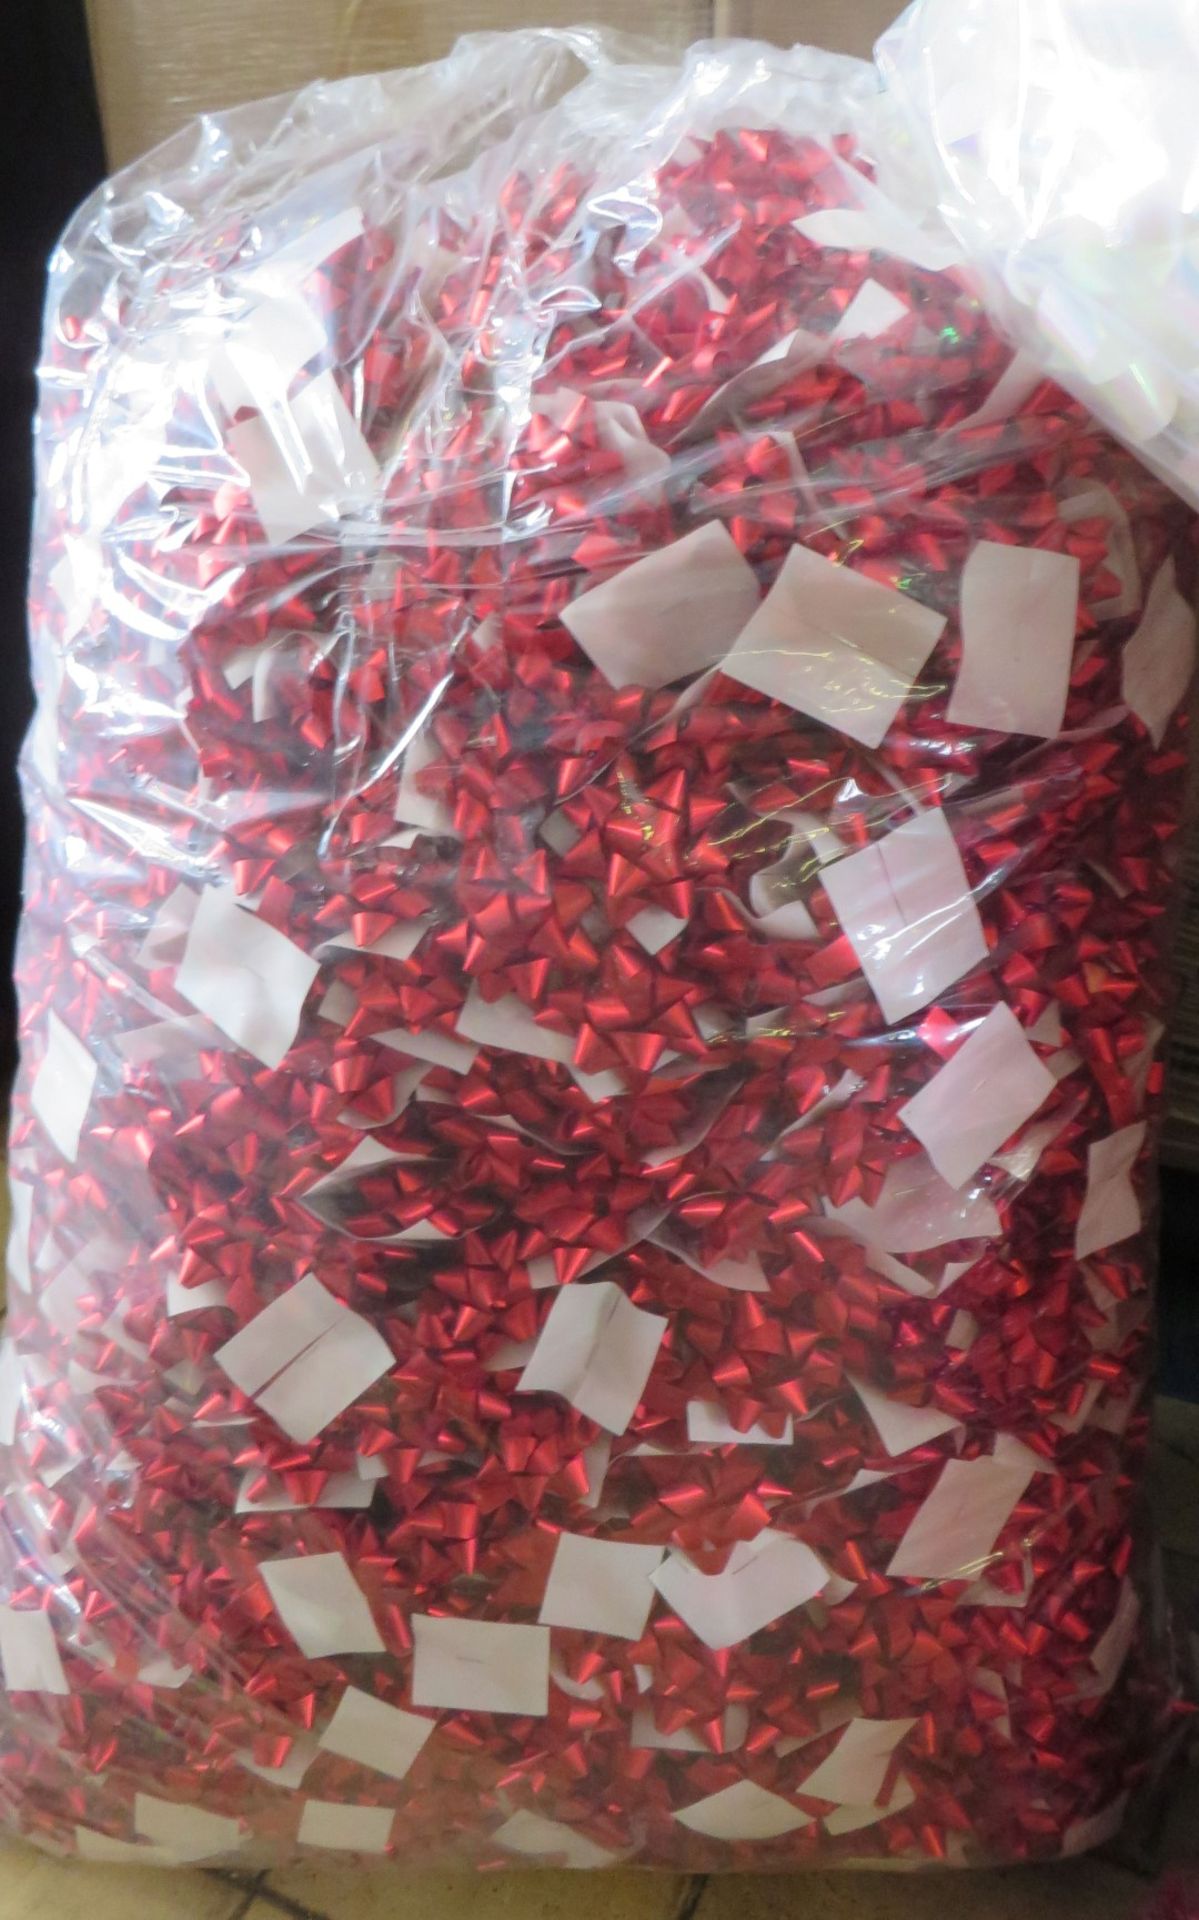 5 x Large Bags of New Self-Adhesive Present Bows - CL185 - Ref: DSY0252 - Location: Stoke-on-Trent S - Image 7 of 8